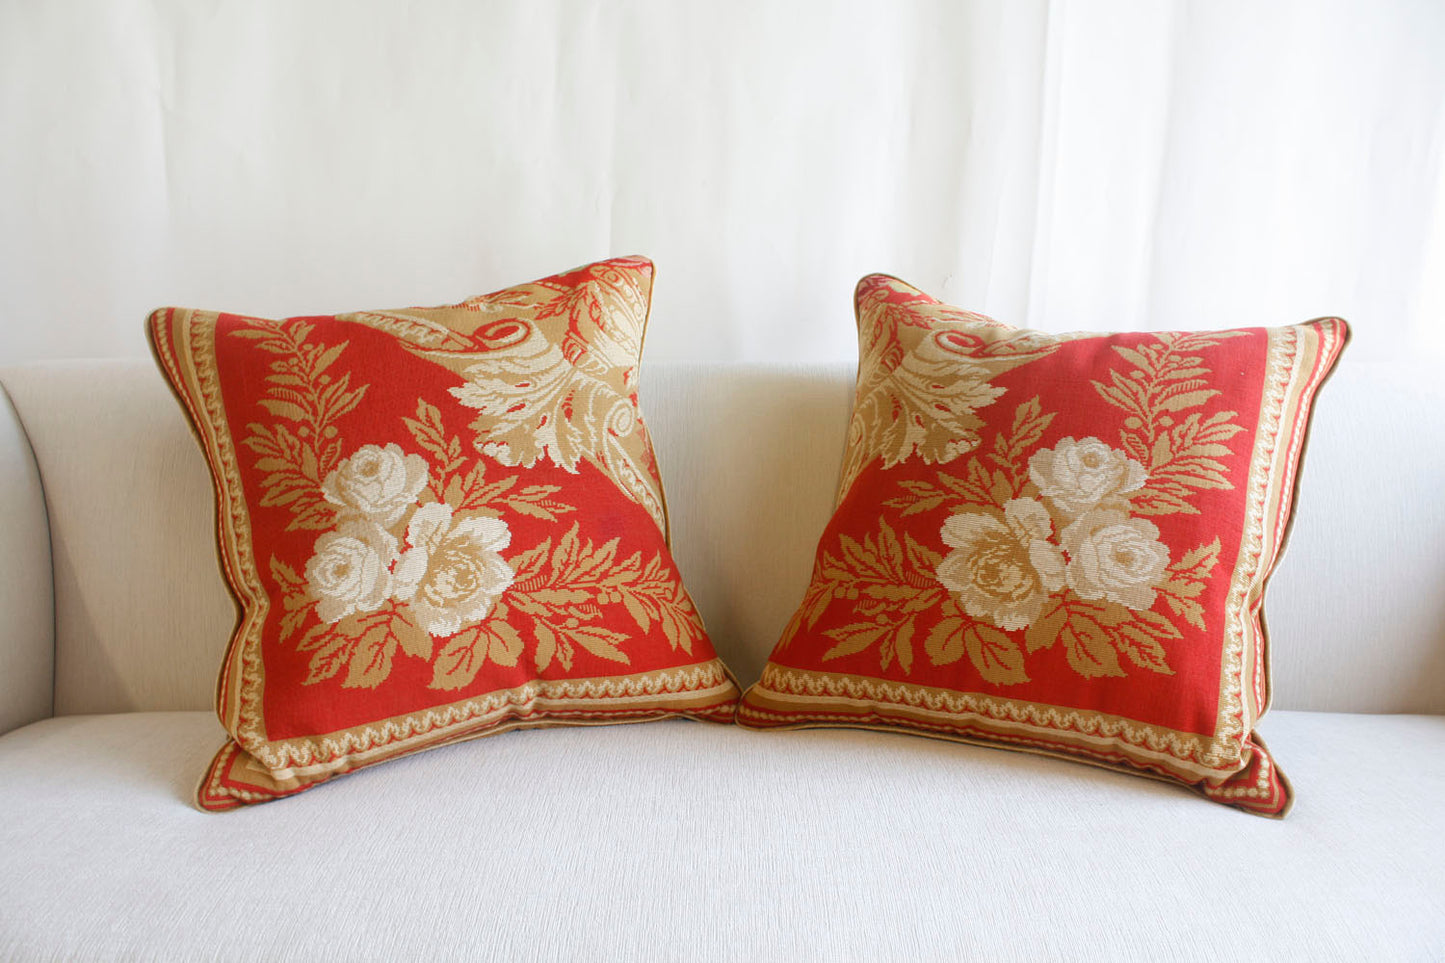 Pair of Neoclassical Style Throw Pillows